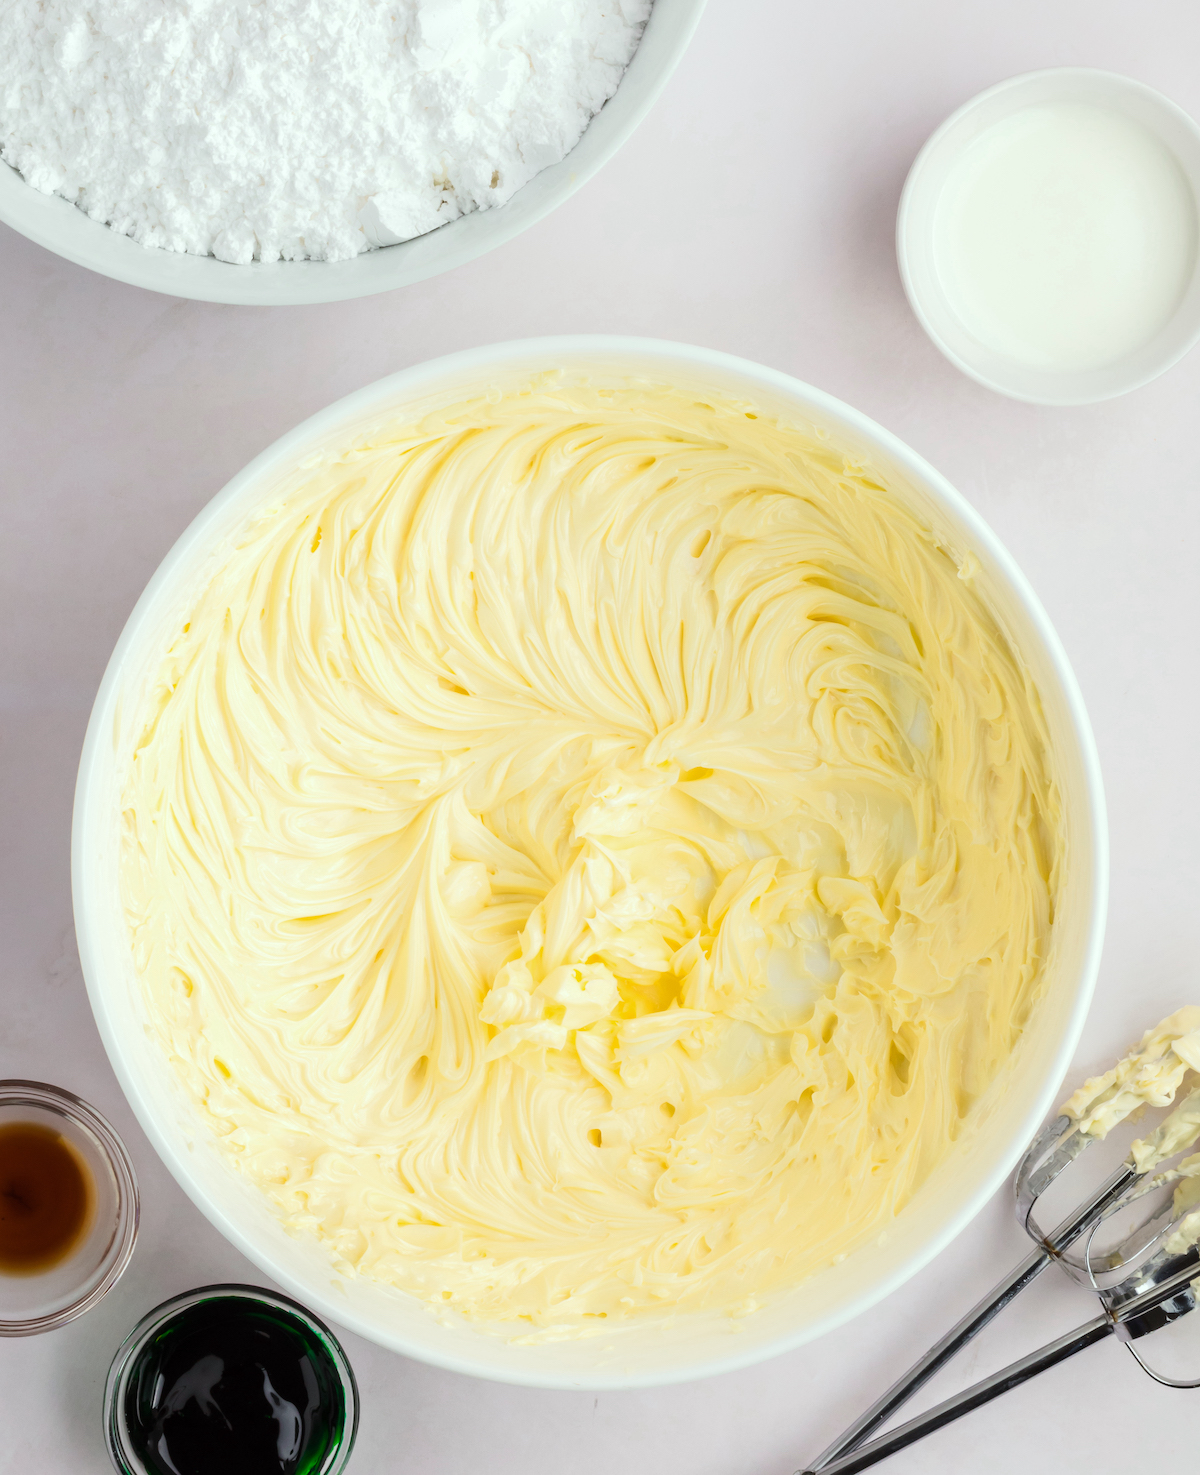 Creamed butter in a white ceramic bowl